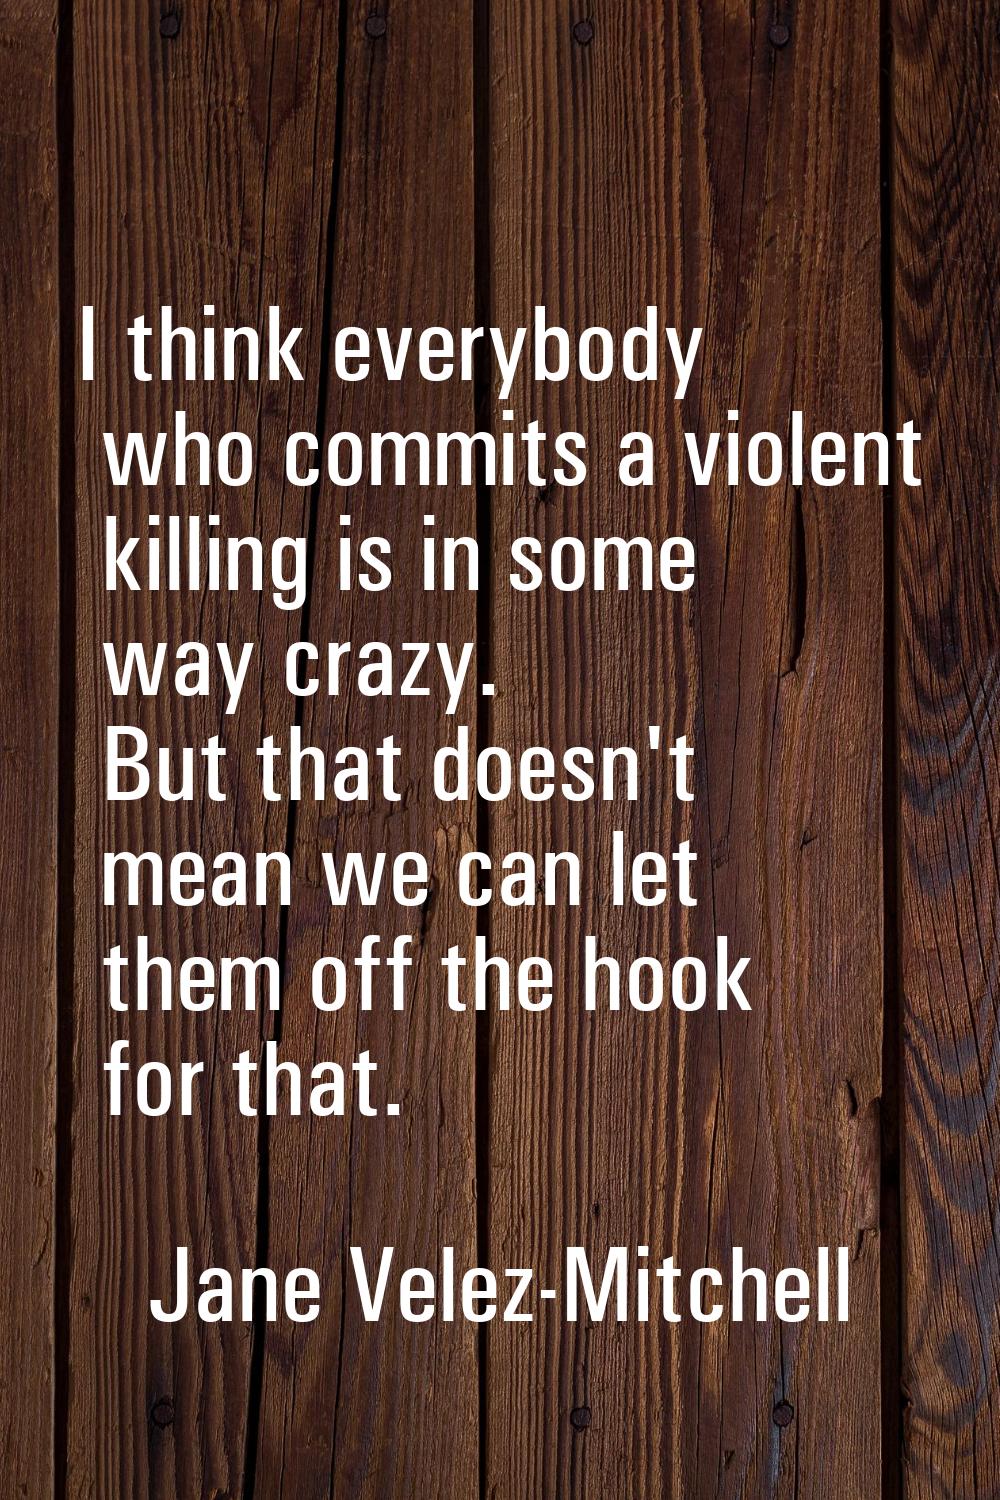 I think everybody who commits a violent killing is in some way crazy. But that doesn't mean we can 